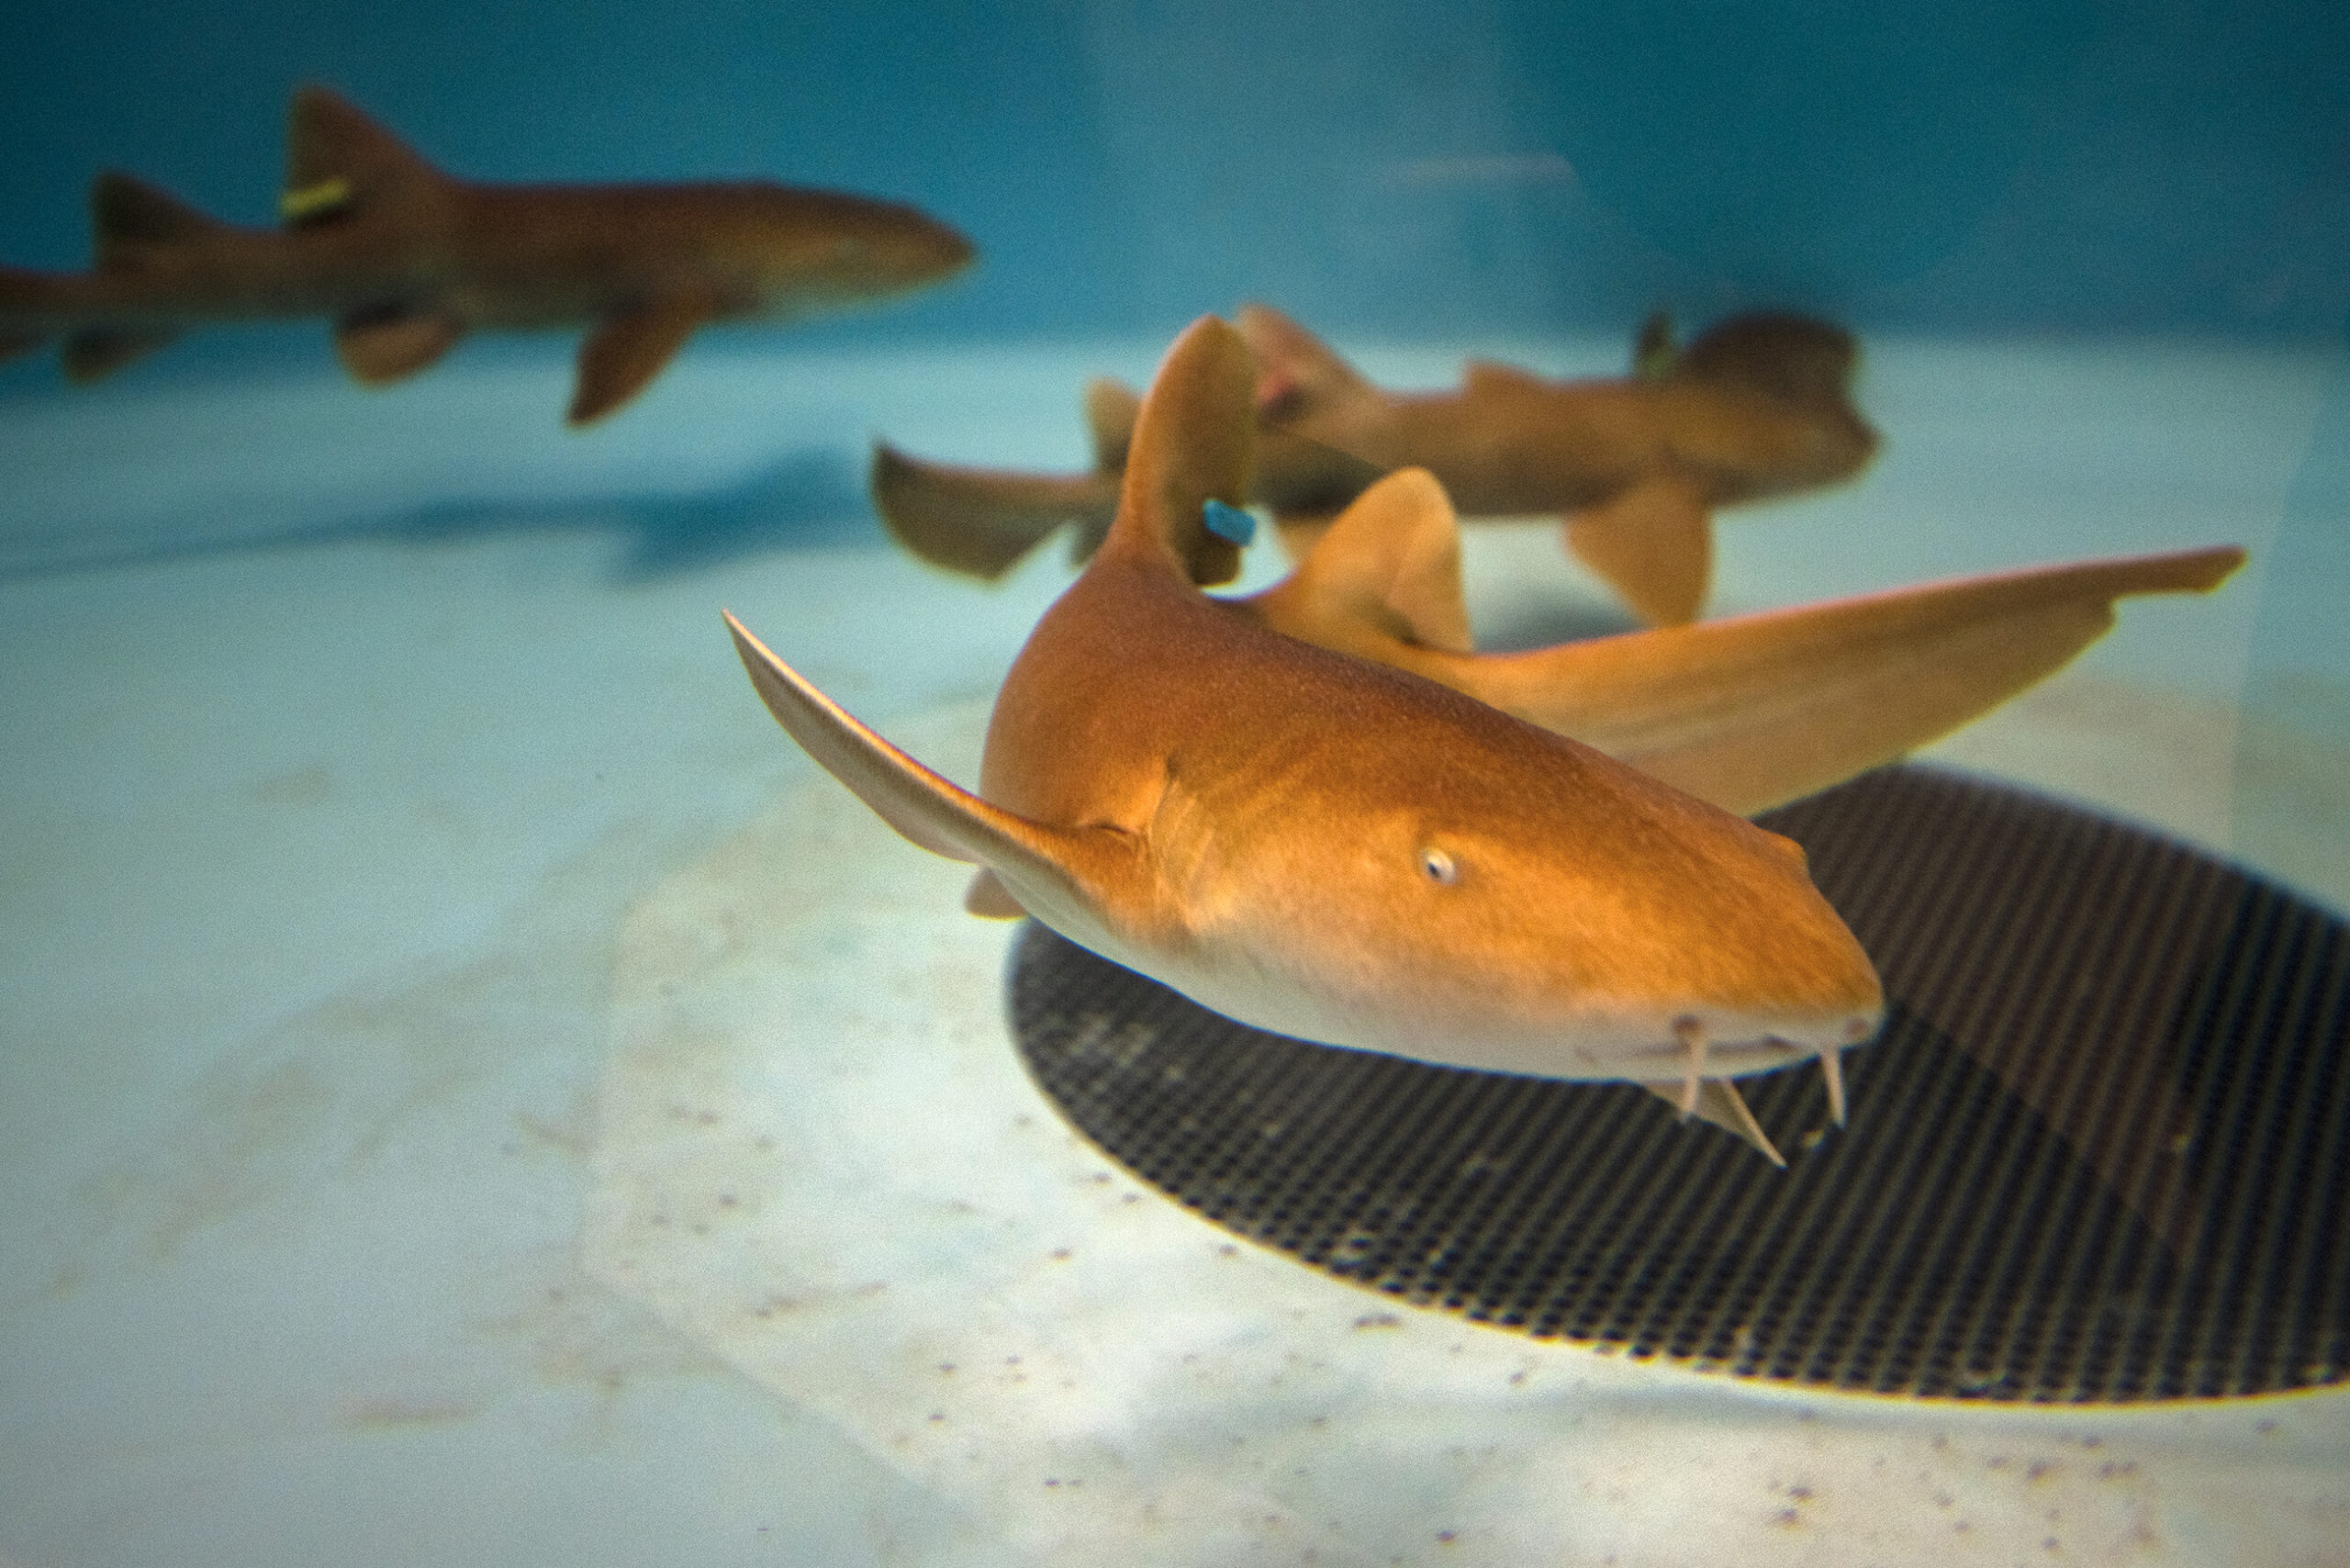 A brown shark swims at the bottom of a tank with blue walls.